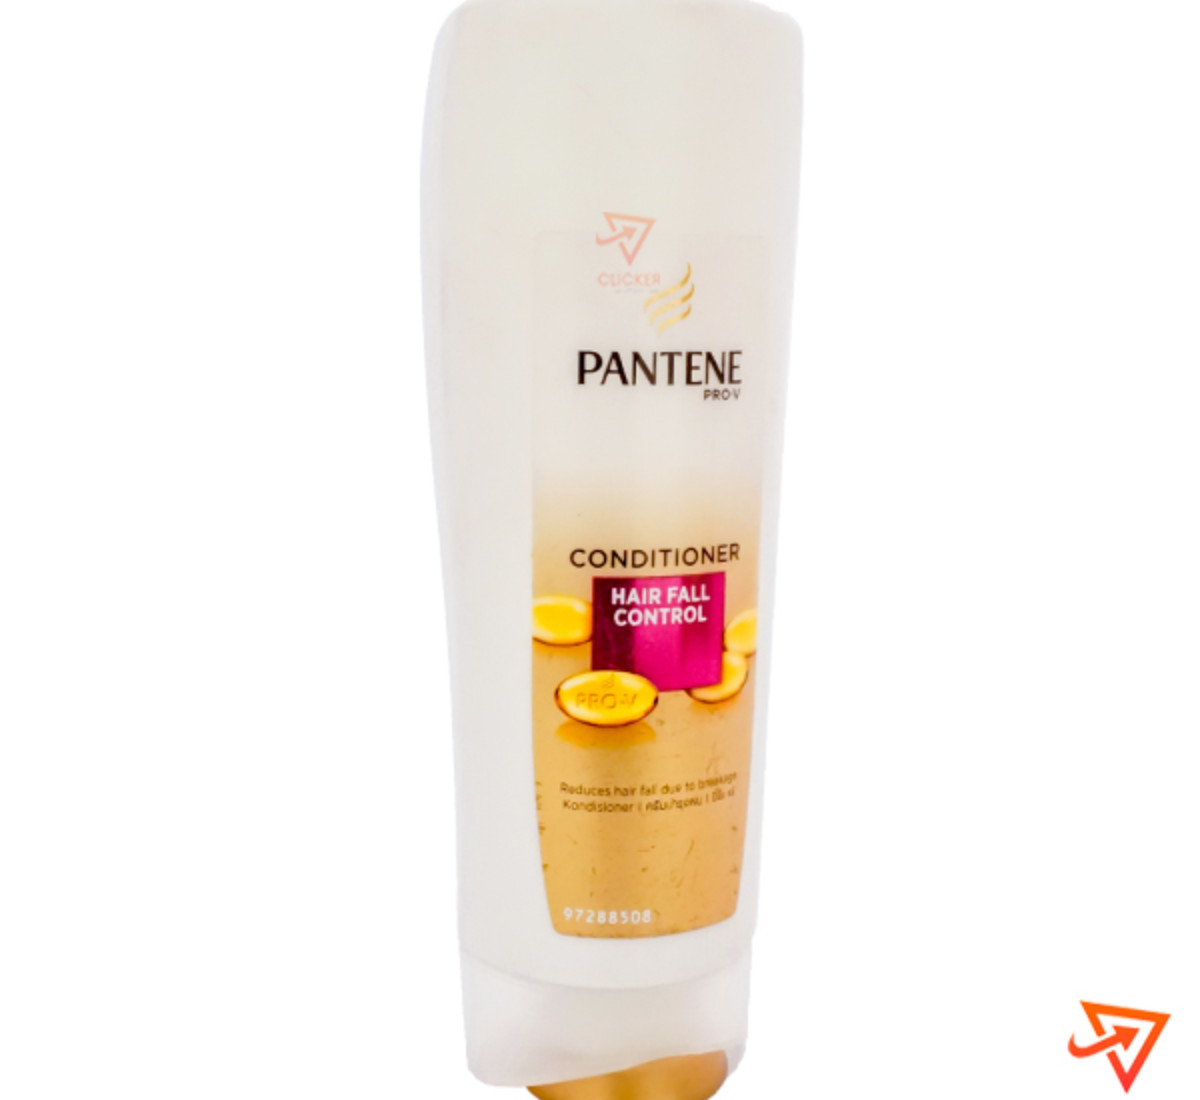 Clicker product 165ml PANTENE conditioner hair fall control 1079